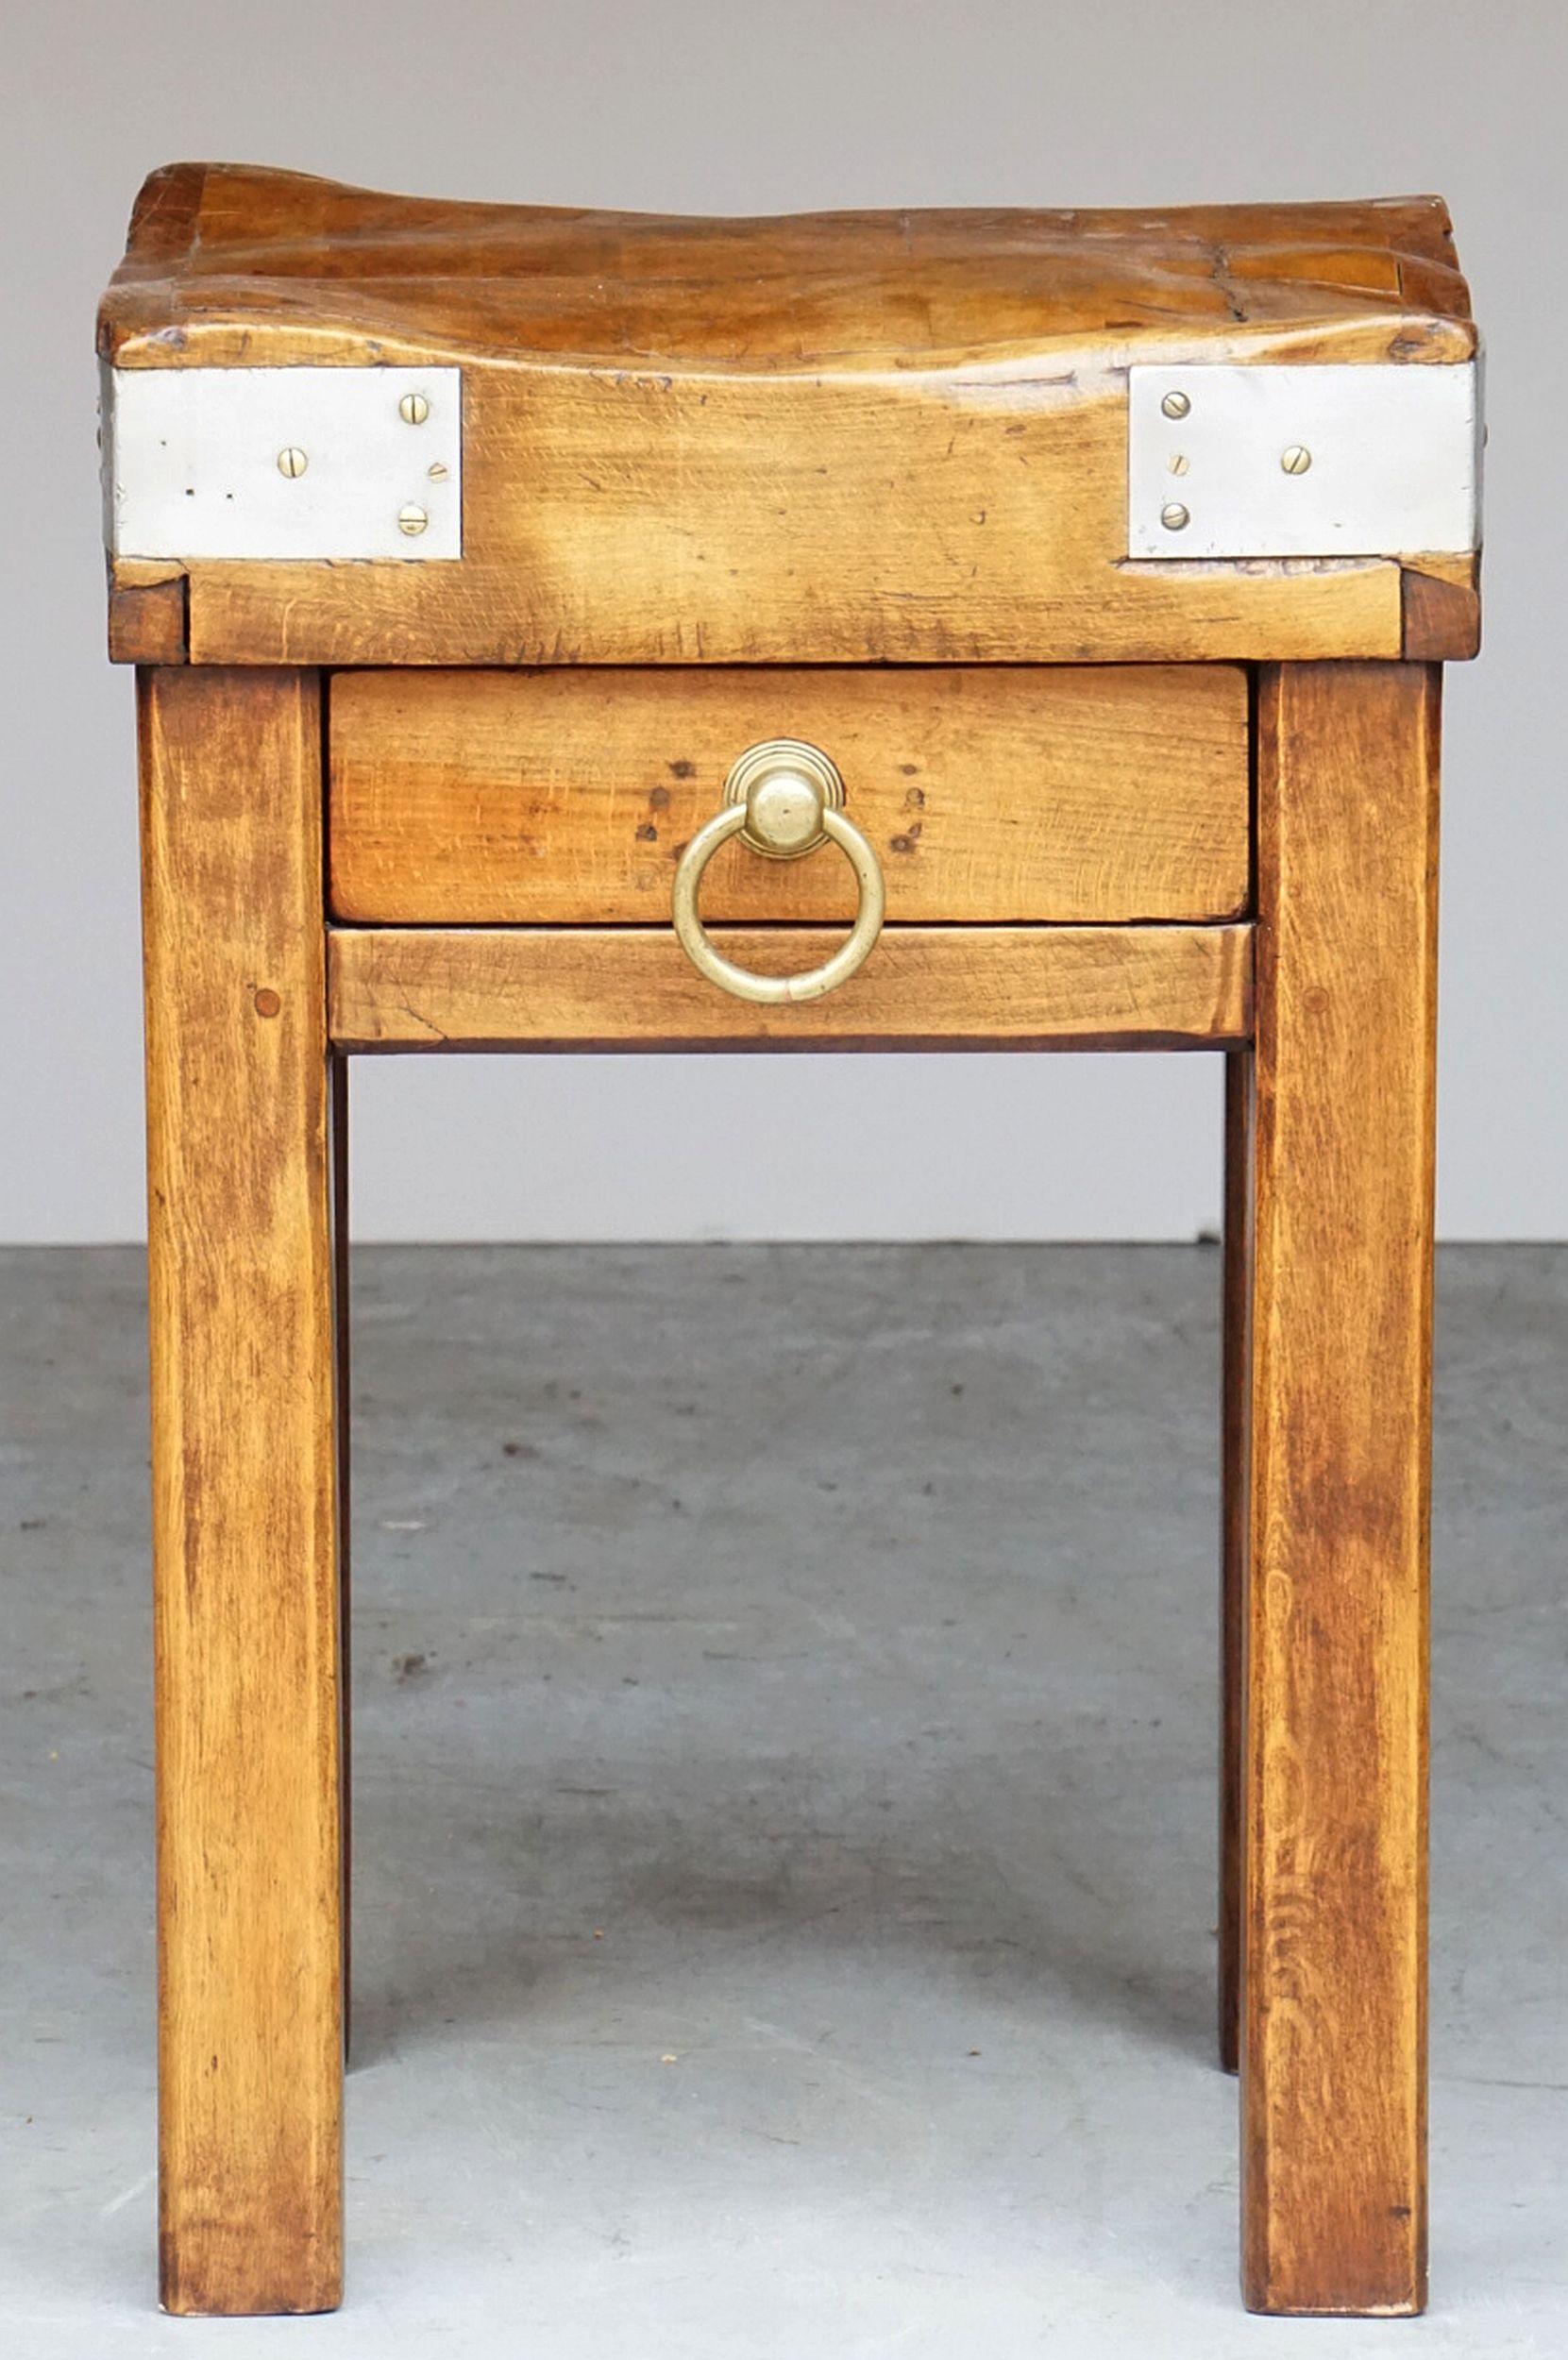 A fine French butcher's chopping block or table, featuring a large, square sloping block or slab of bound wood set upon a four-legged support stand of stained pine. Stand with drawer and large brass ring pull.

